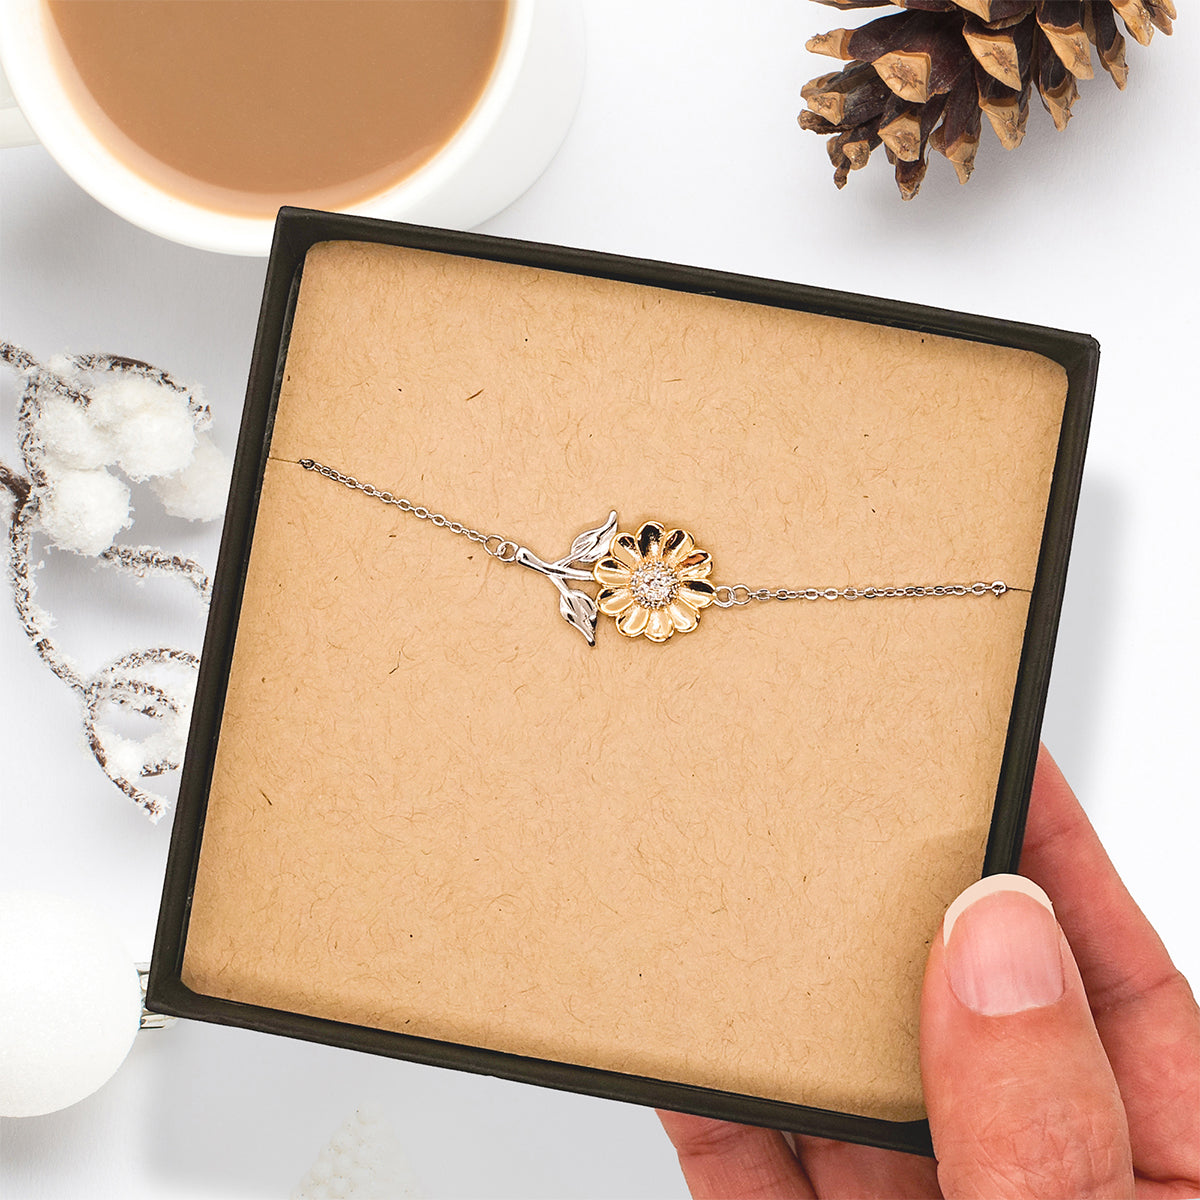 Engraved Sunflower Bracelet for Nanny - You Will Always Have a Special Place in My Heart - Thoughtful Gift for Nanny - Birthday, Christmas, Holidays, and More